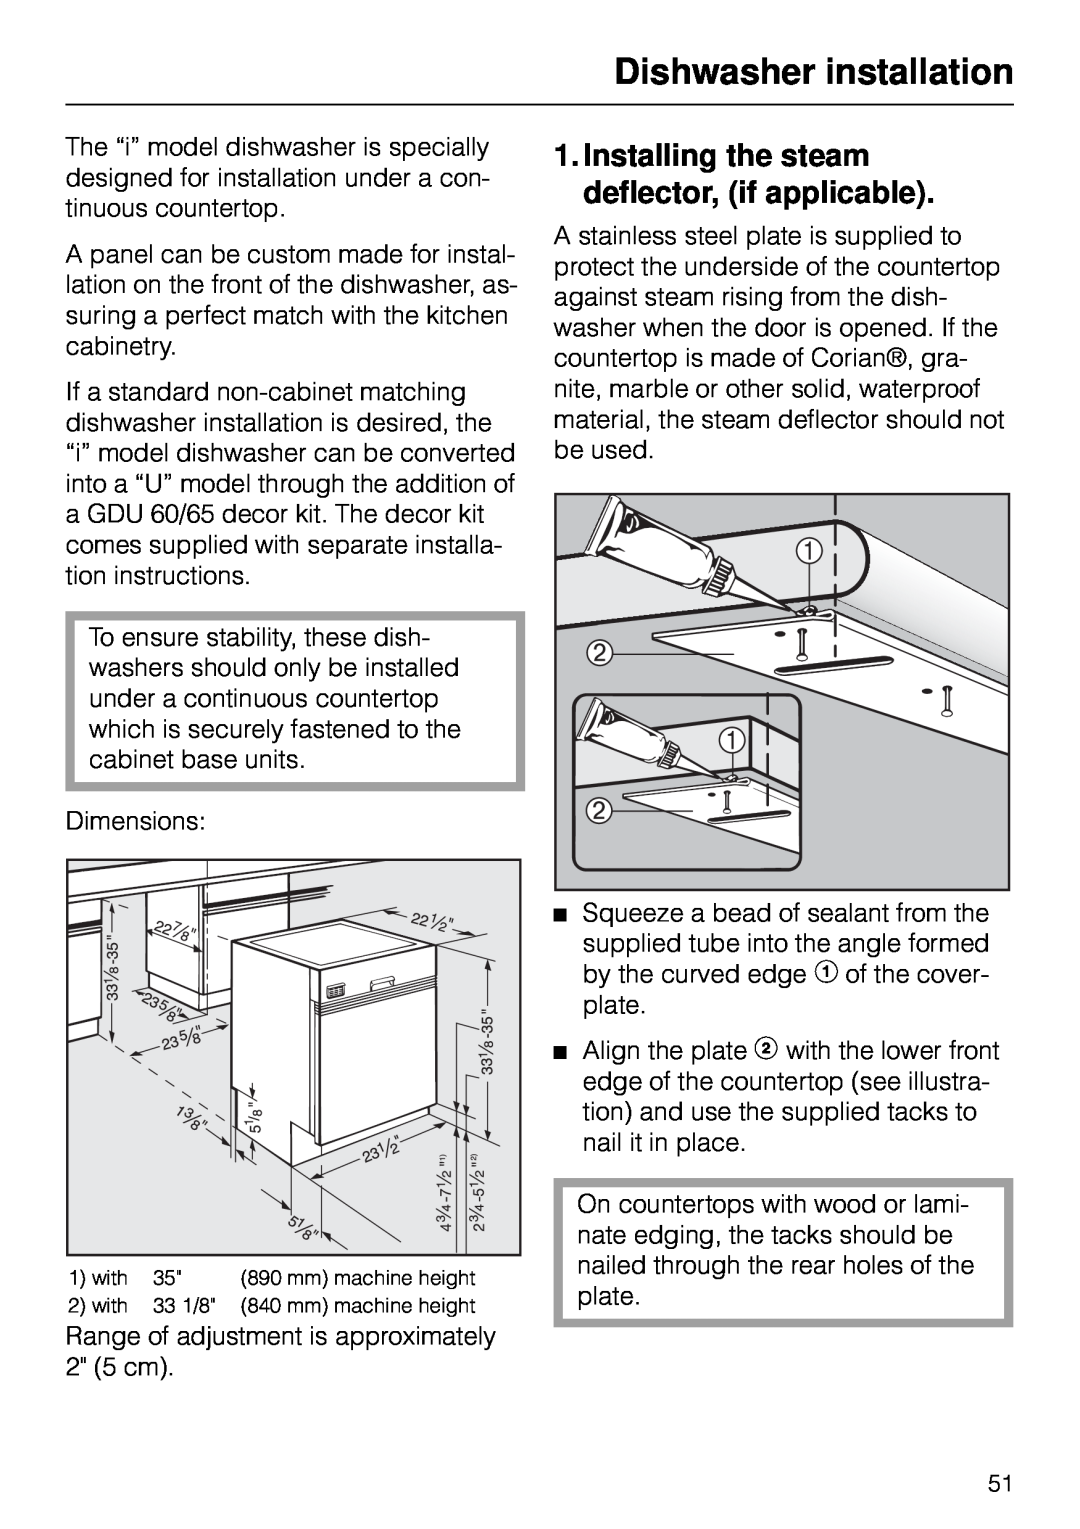 Miele G 890 manual Dishwasher installation, Installing the steam deflector, if applicable 